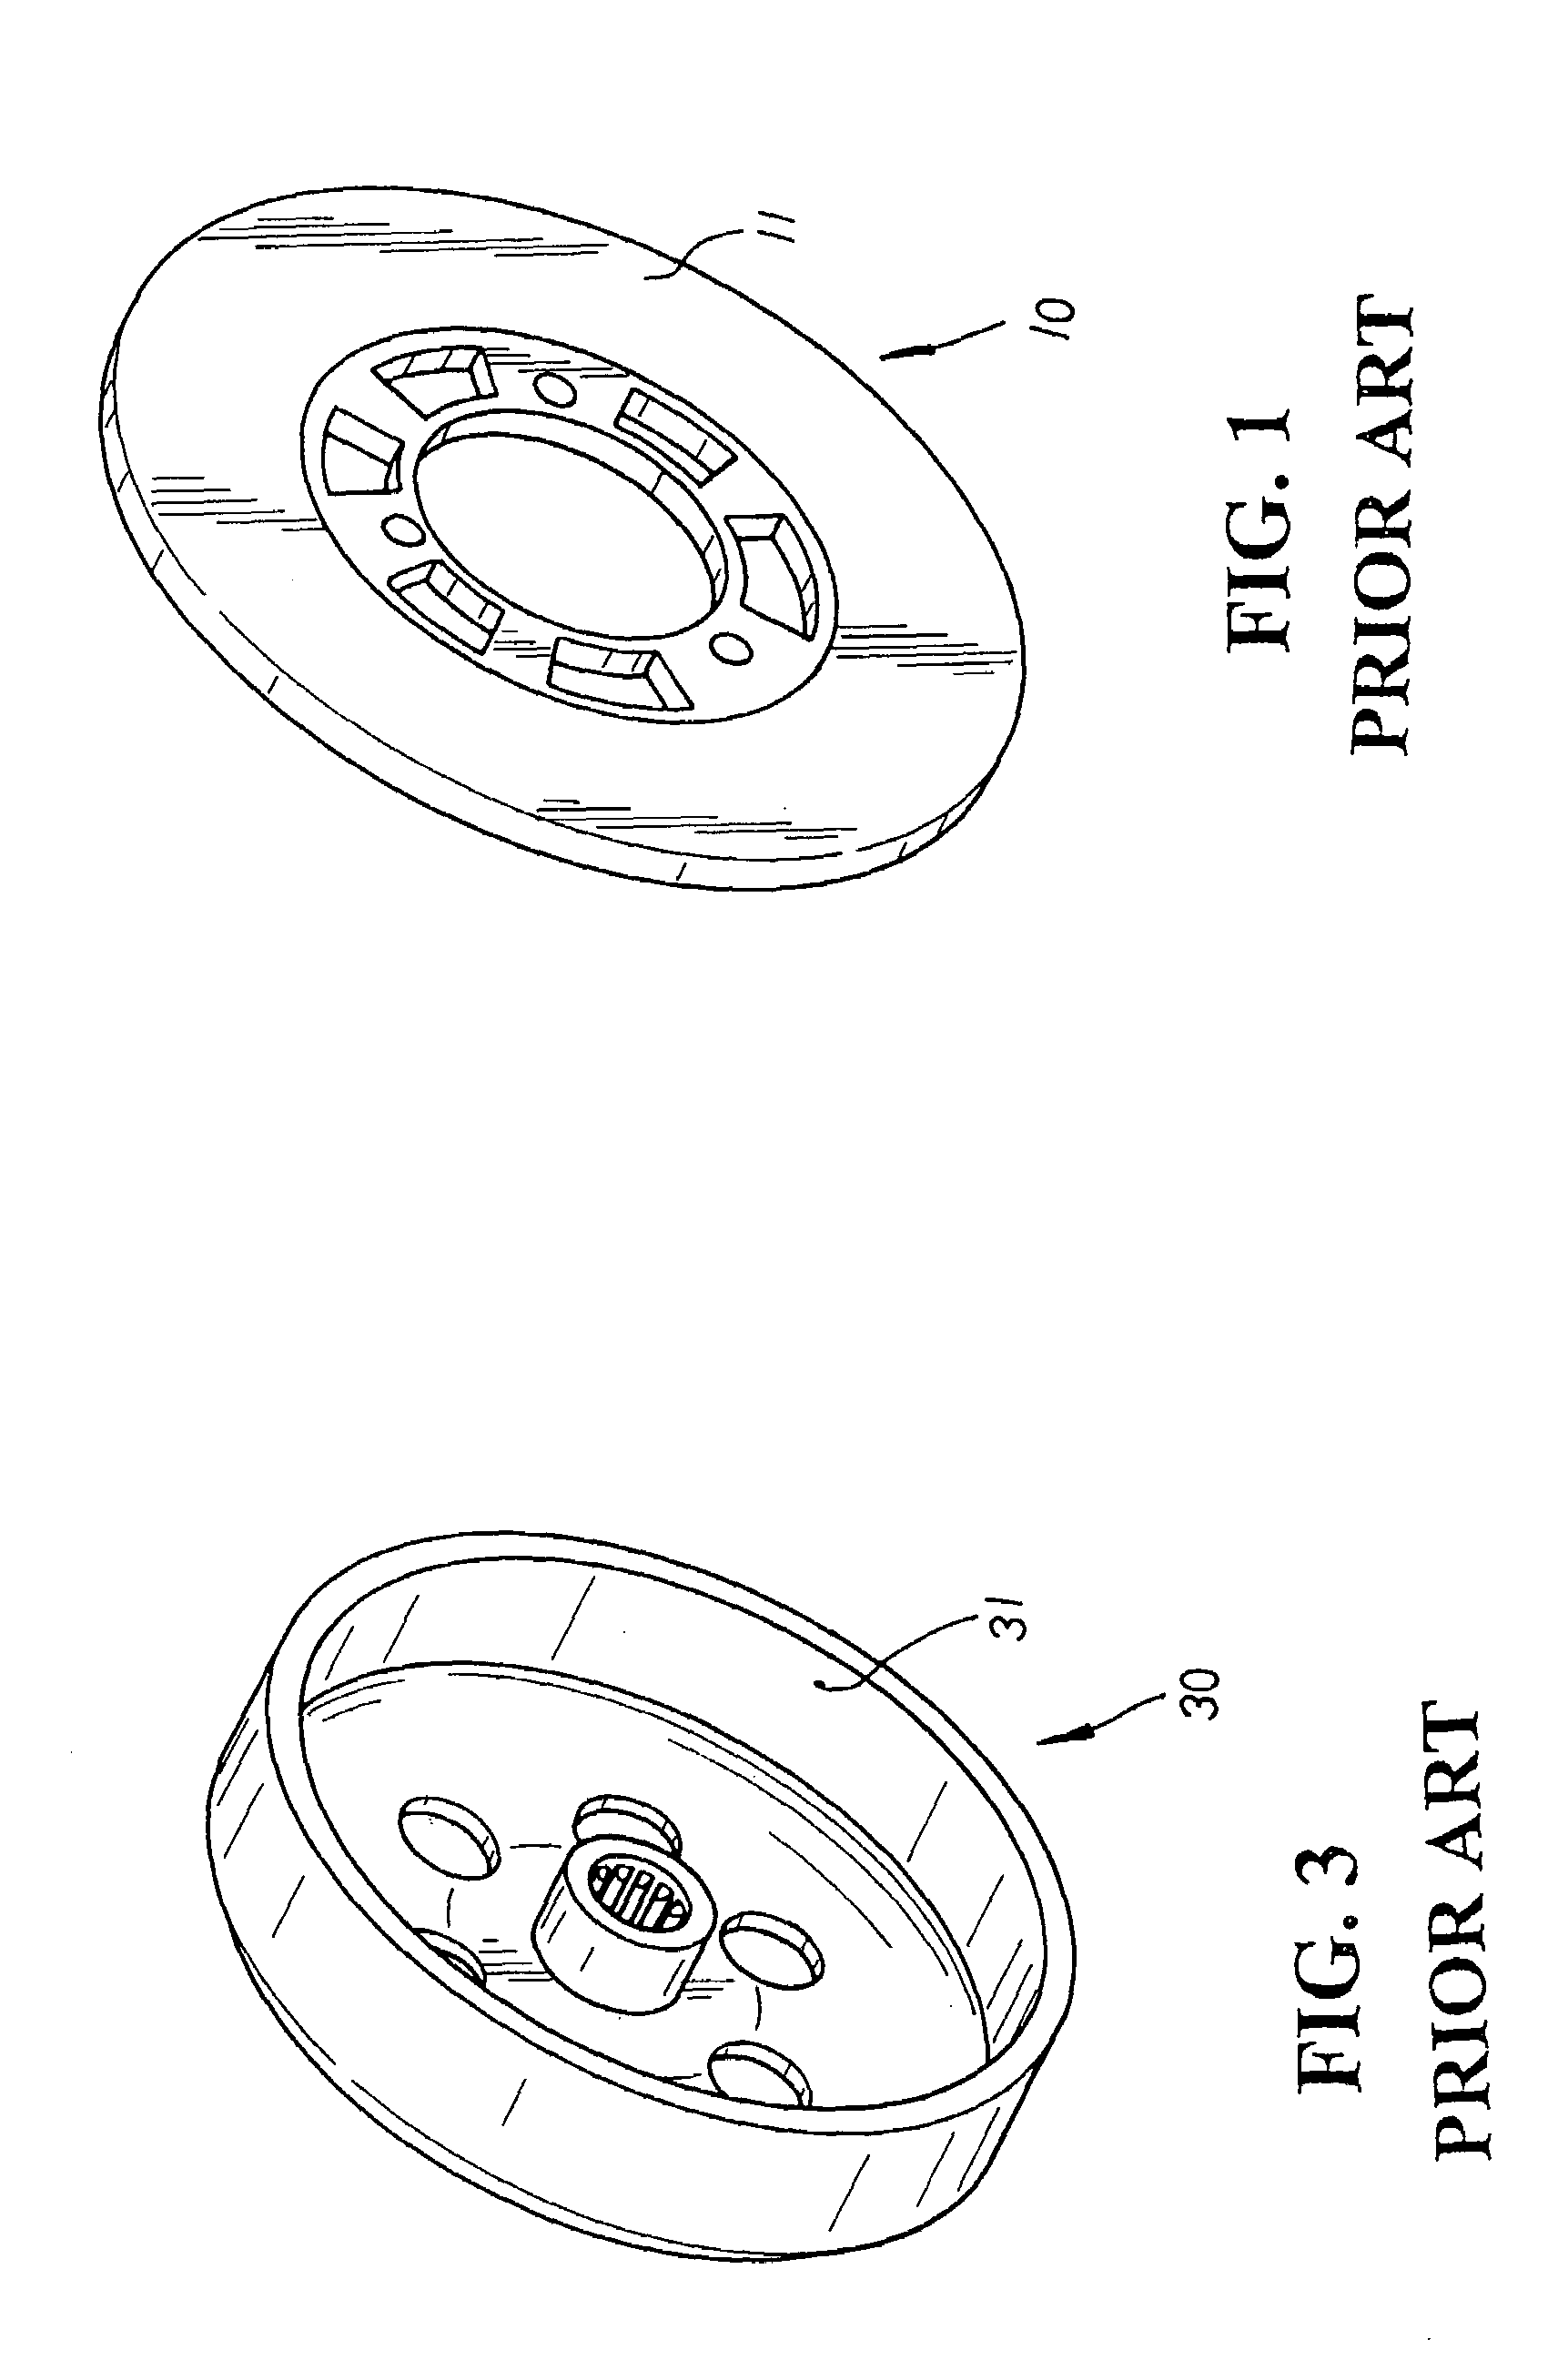 Brake structure of vehicle